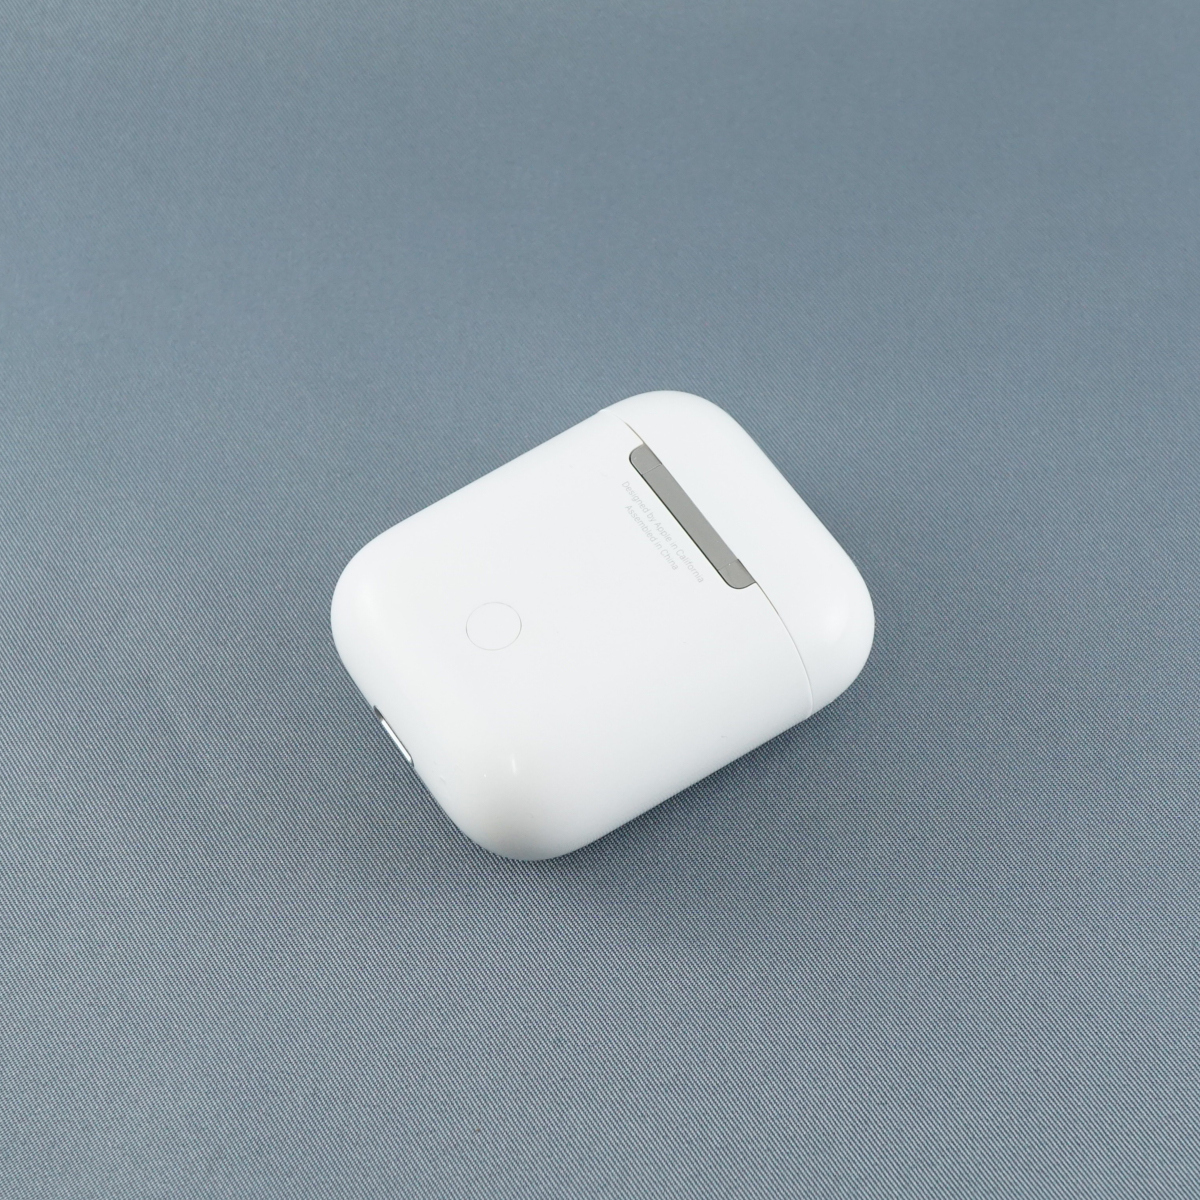 Apple AirPods エアーポッズ 充電ケースのみ USED美品 第二世代 Apple AirPods MRXJ2J/A 完動品 安心保証 即日発送 V5254_画像2